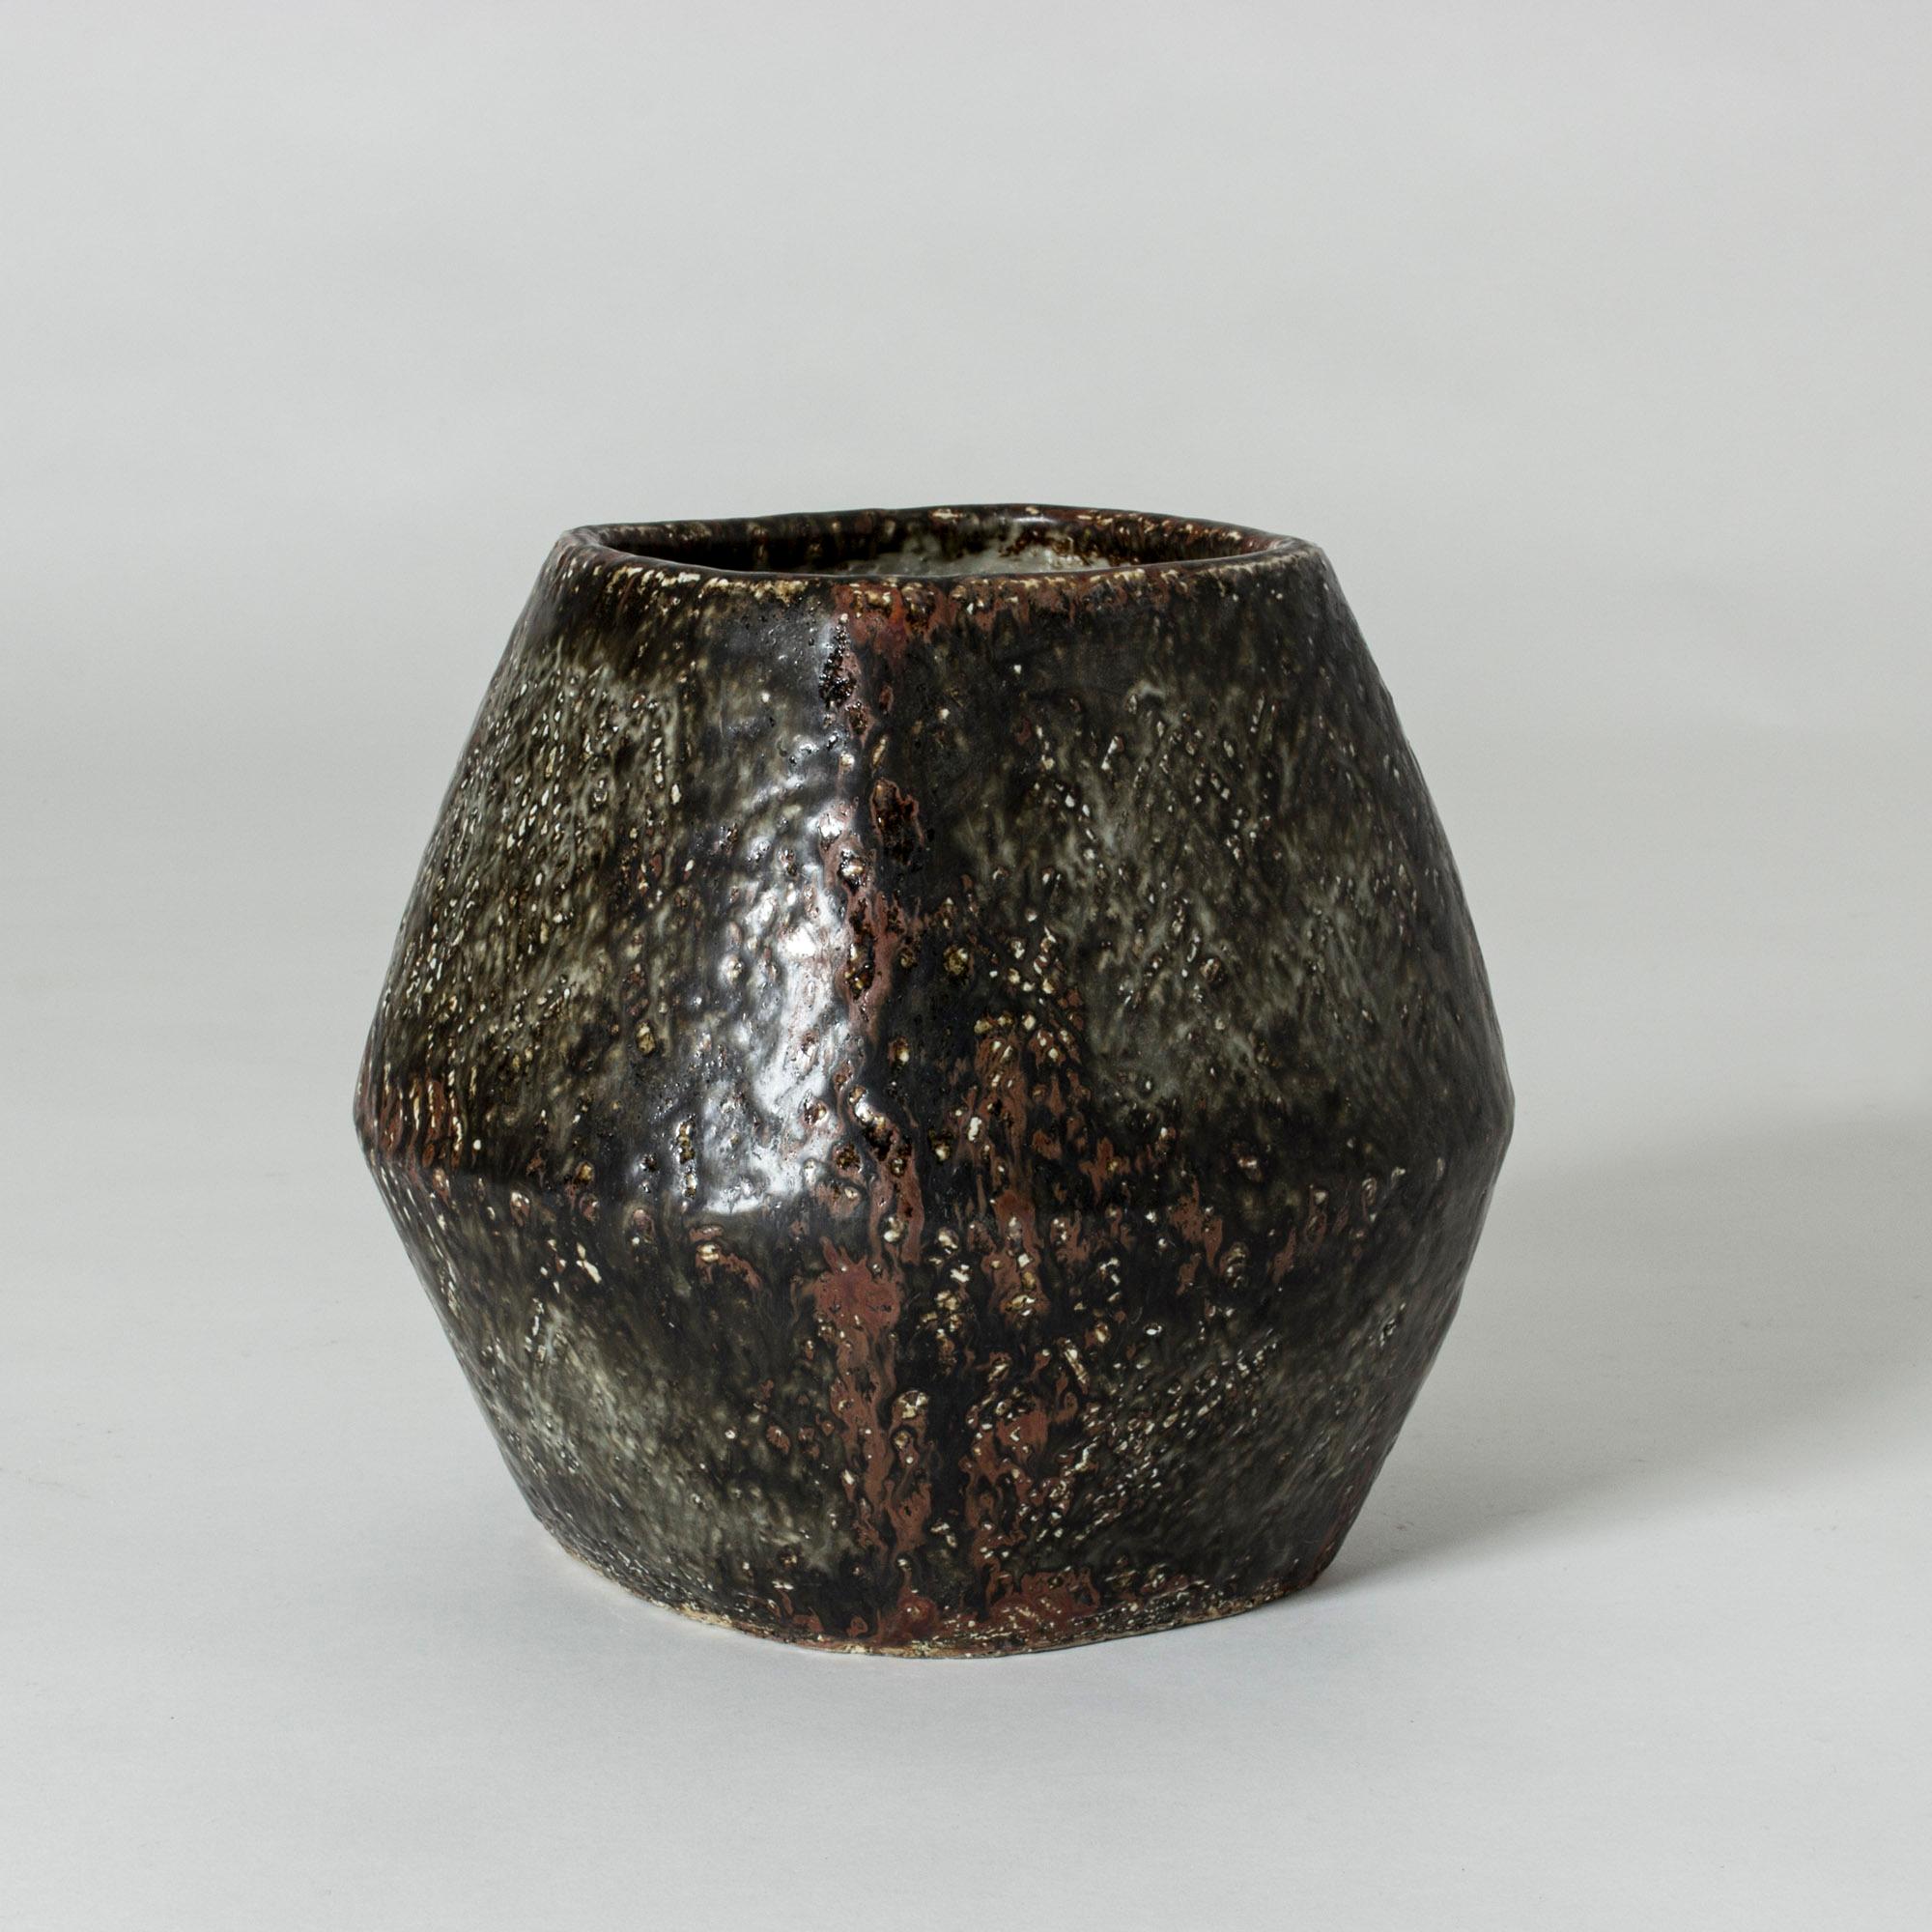 Unique chamotte vase by Carl-Harry Stålhane, made in a heavyset design with dark, thick glaze, typical of his 1960s production. The glaze is caught in a net-like pattern and the effect is like ice on a rock or bark.